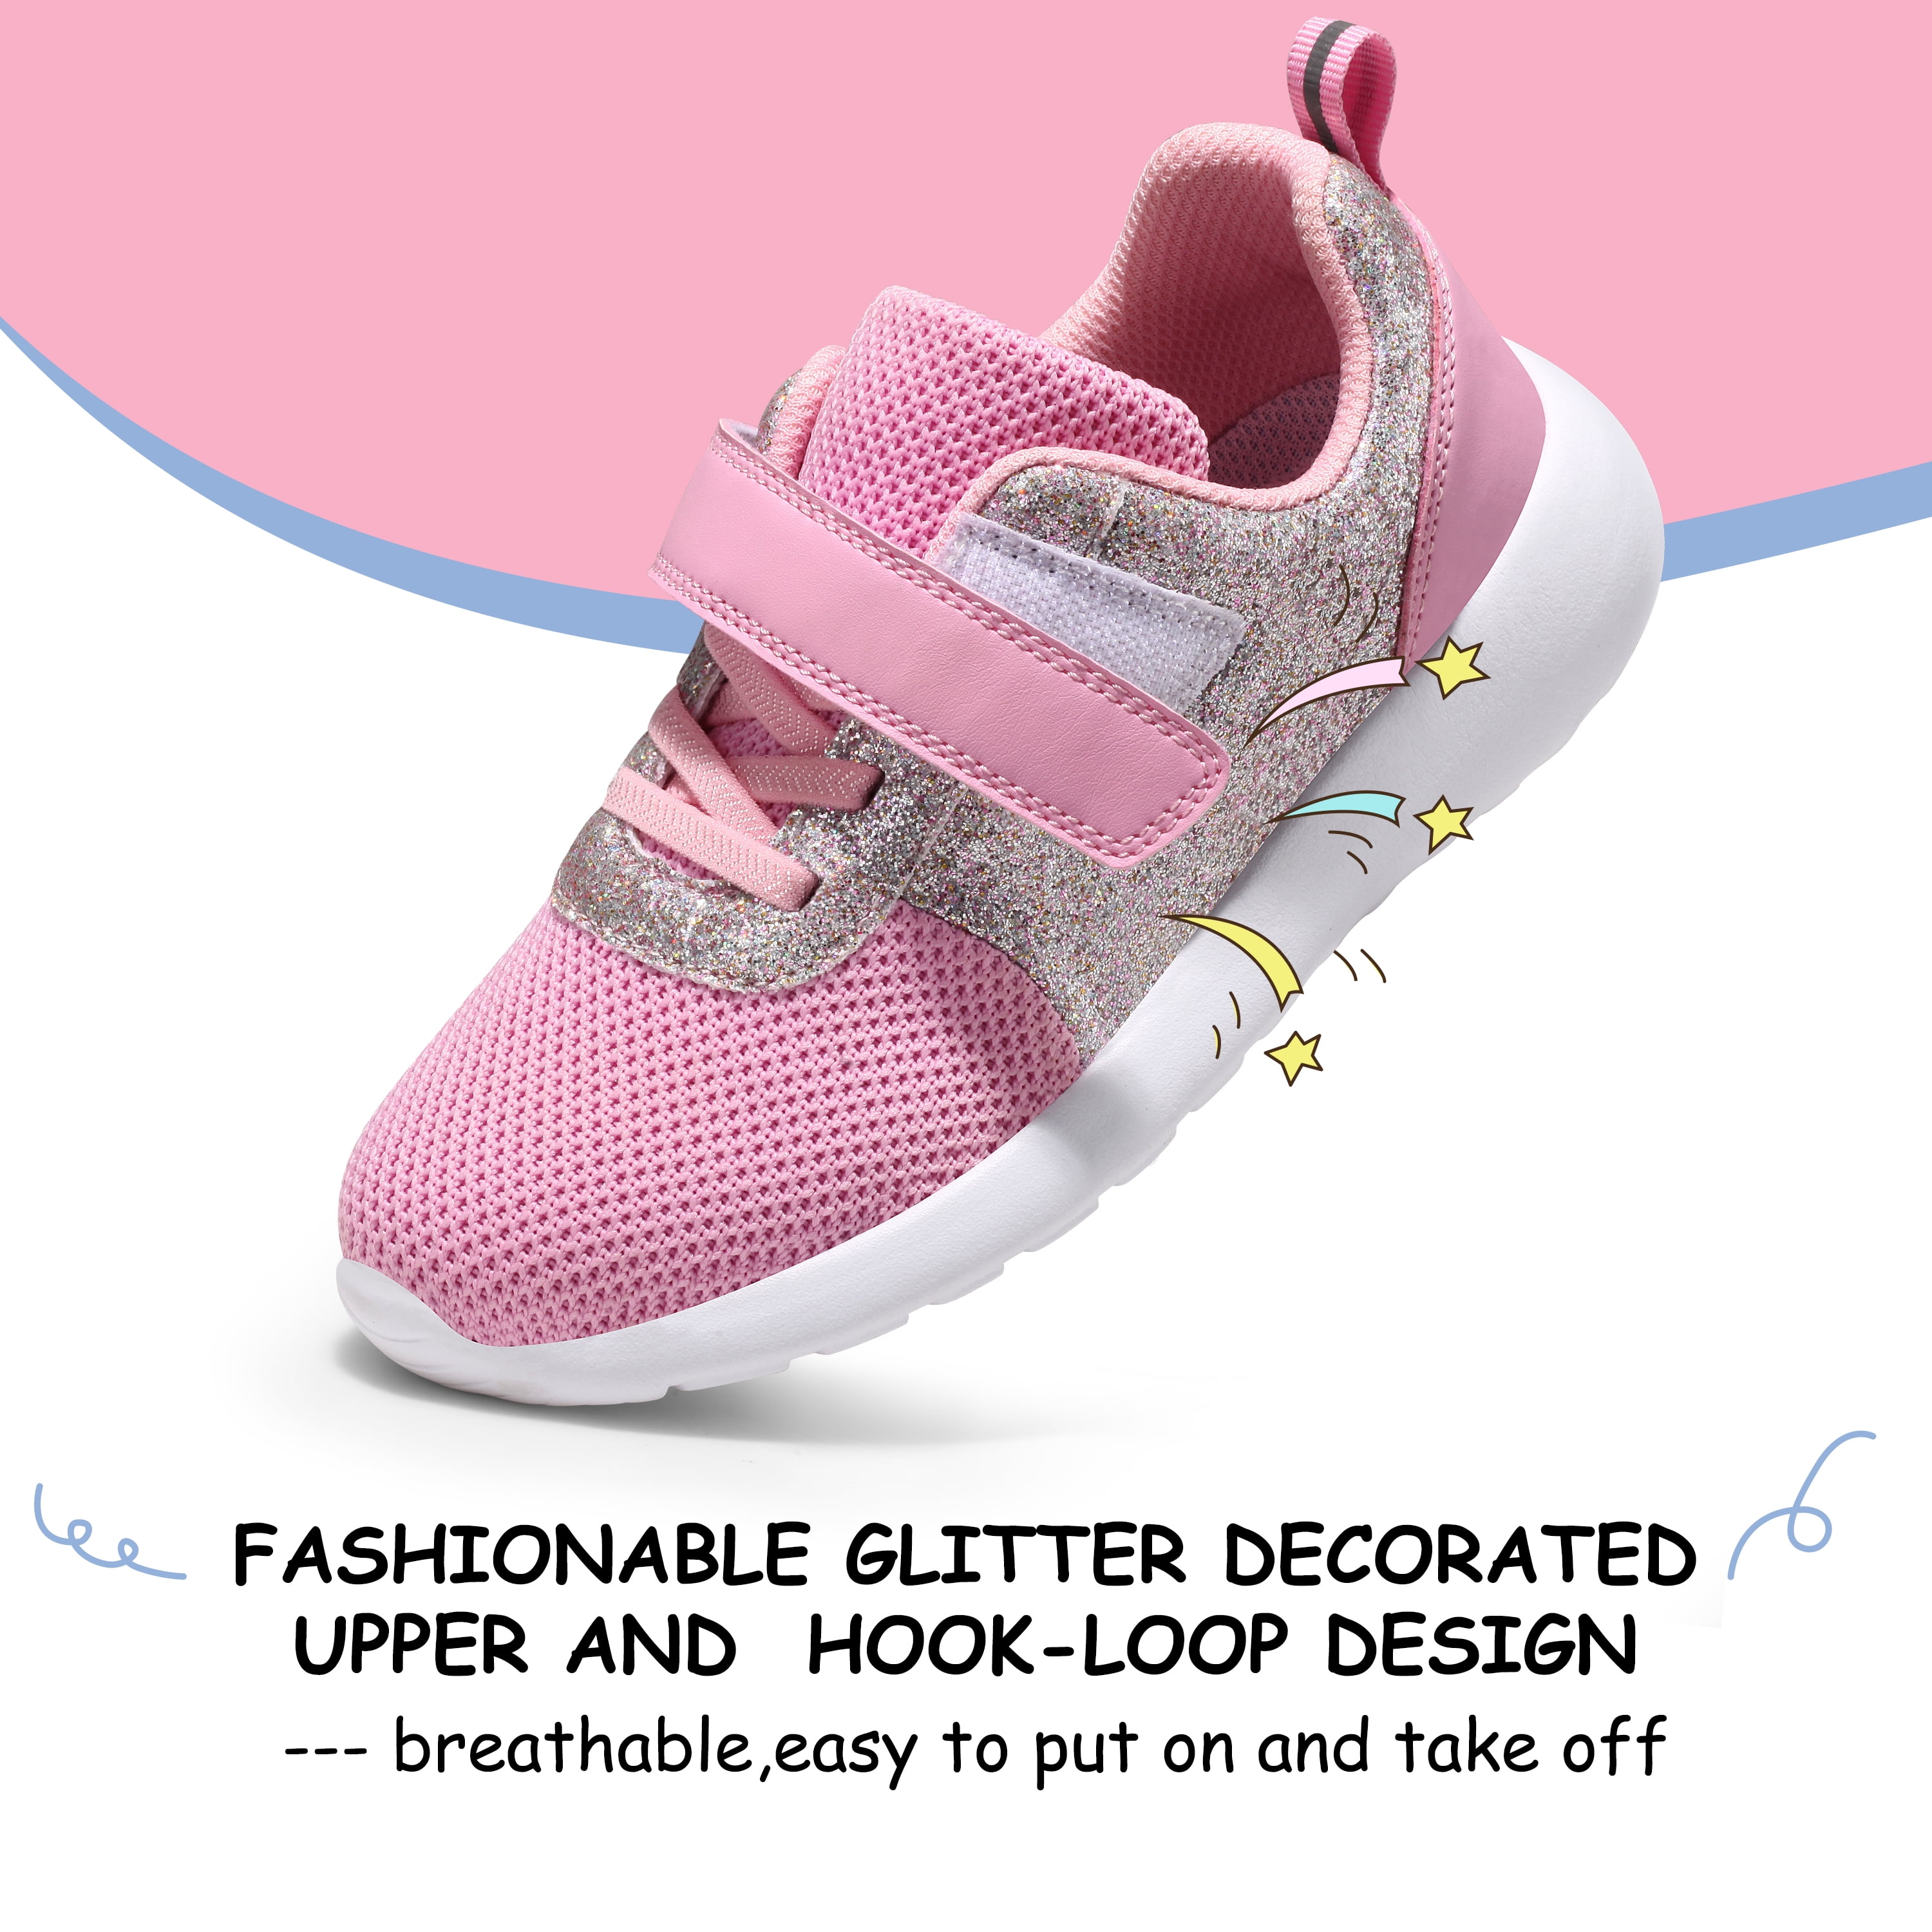 Girls Toddler Size 8 Glitter Sparkly Sneakers Tennis Shoes Link #F17P